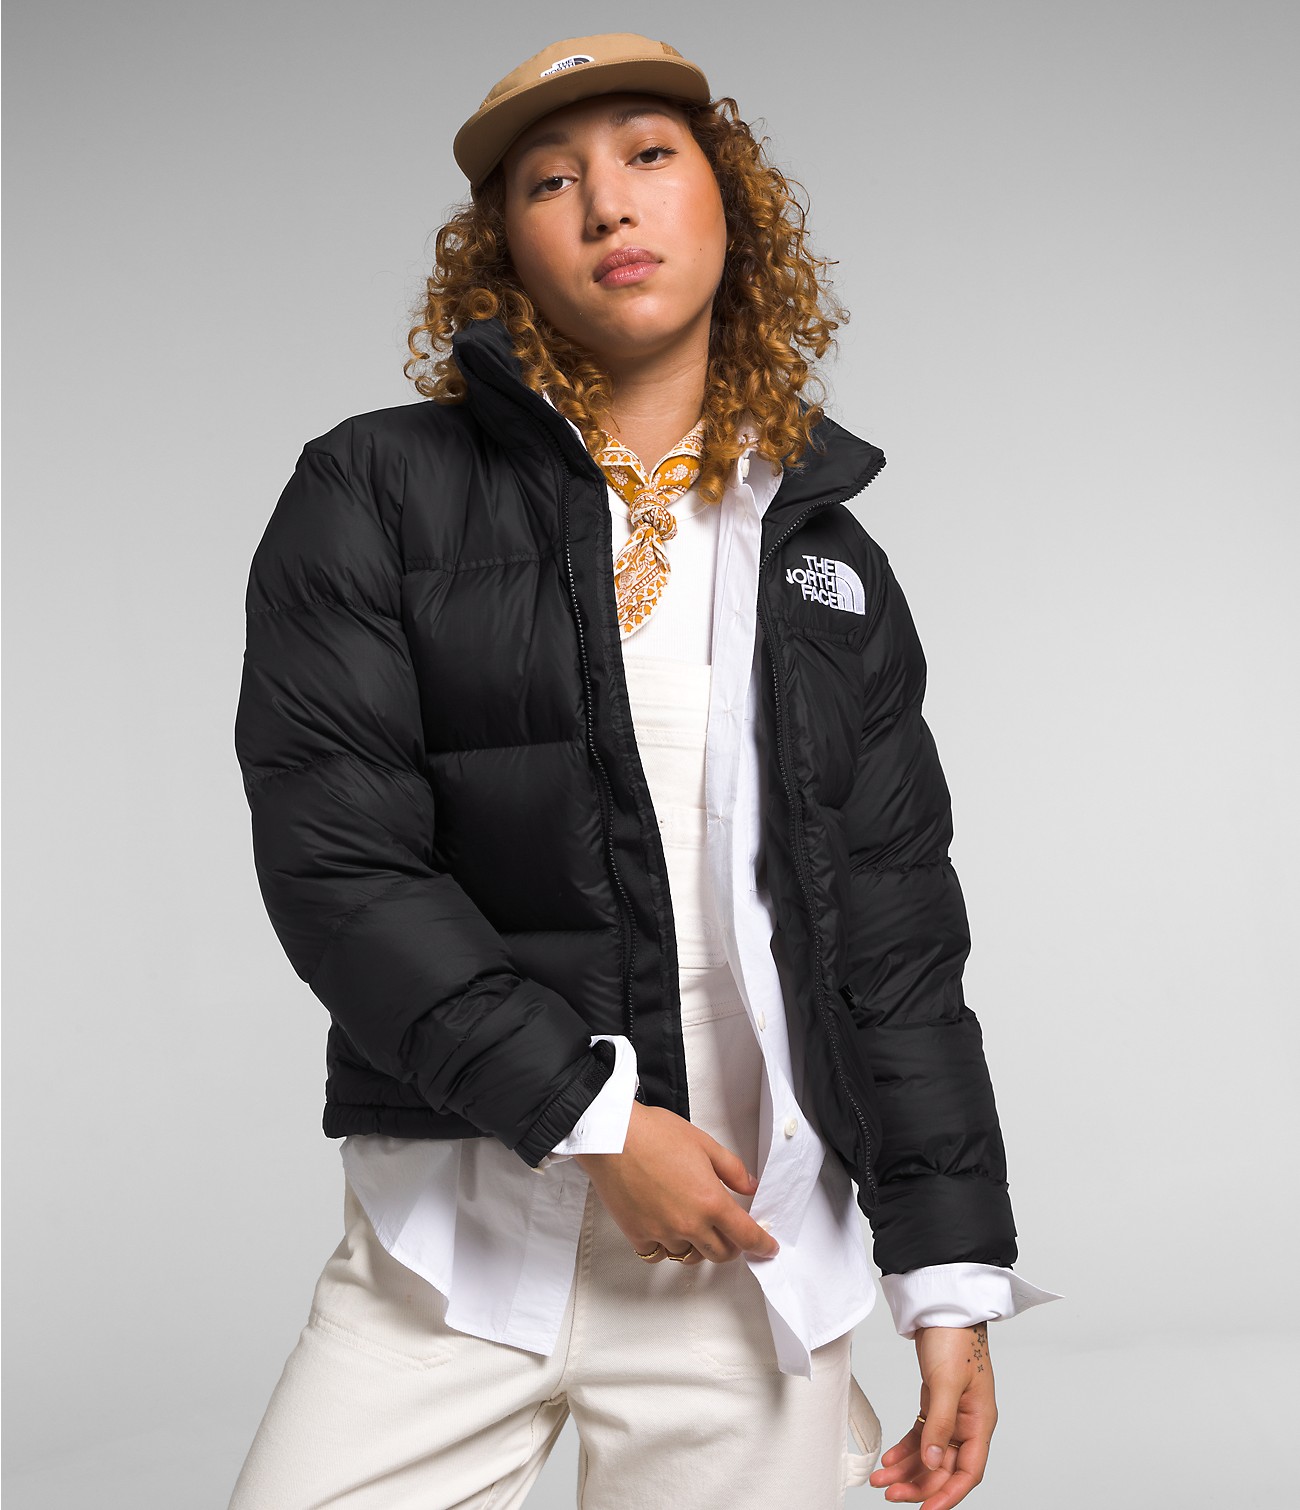 Unlock Wilderness' choice in the Adidas Vs North Face comparison, the 1996 Retro Nuptse Jacket by The North Face